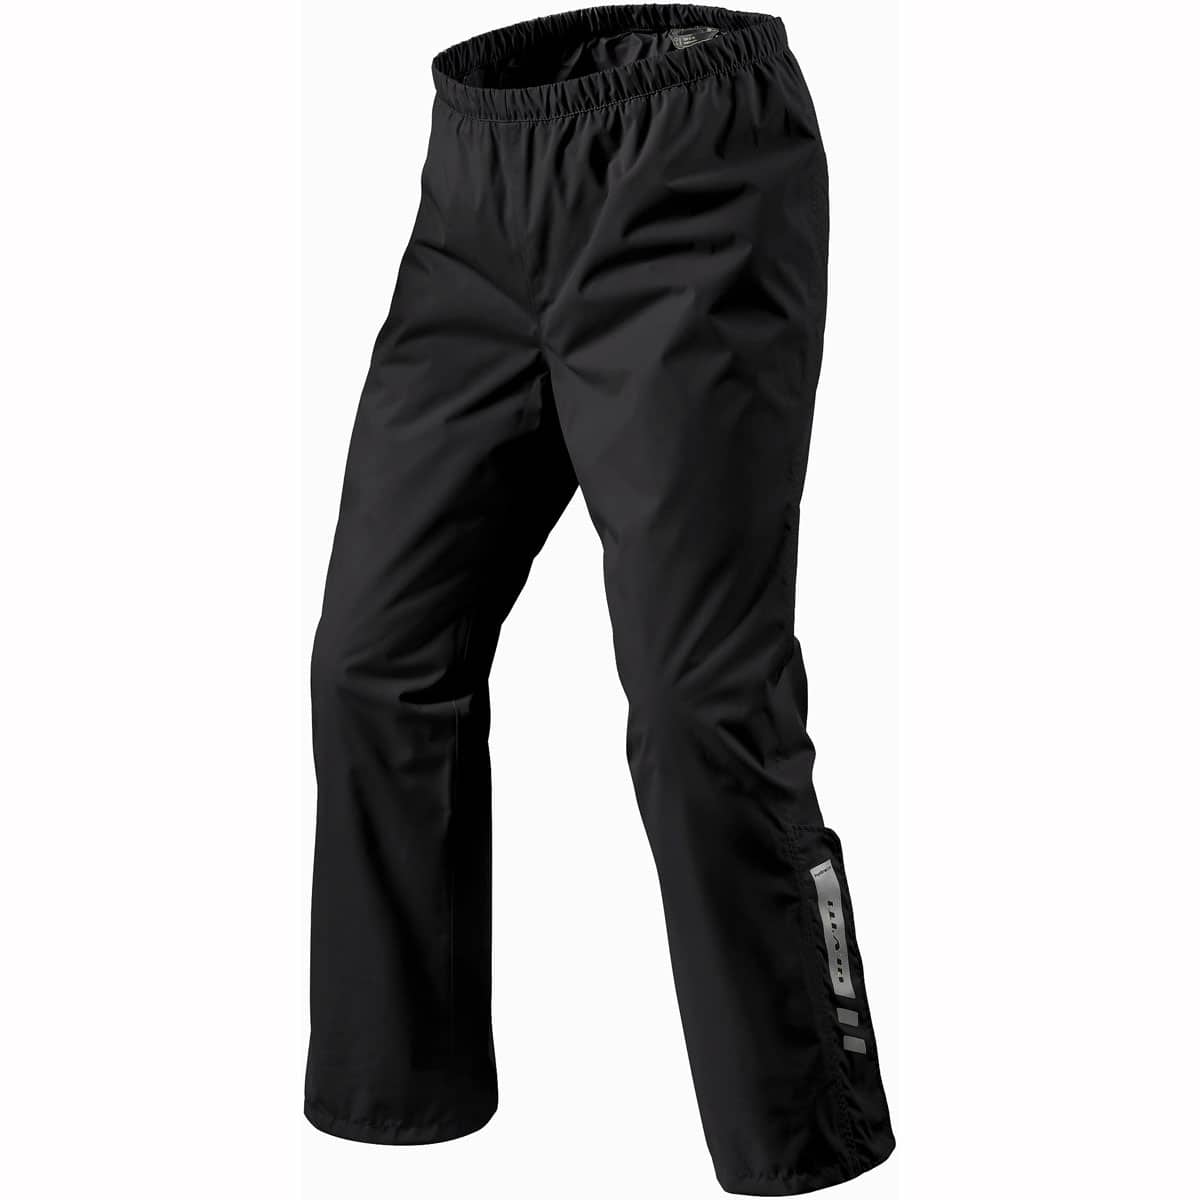 Beat the rain with the Revit Acid 4 rain overtrousers! These ultra-durable rain pants will keep you dry no matter what Mother Nature throws your way